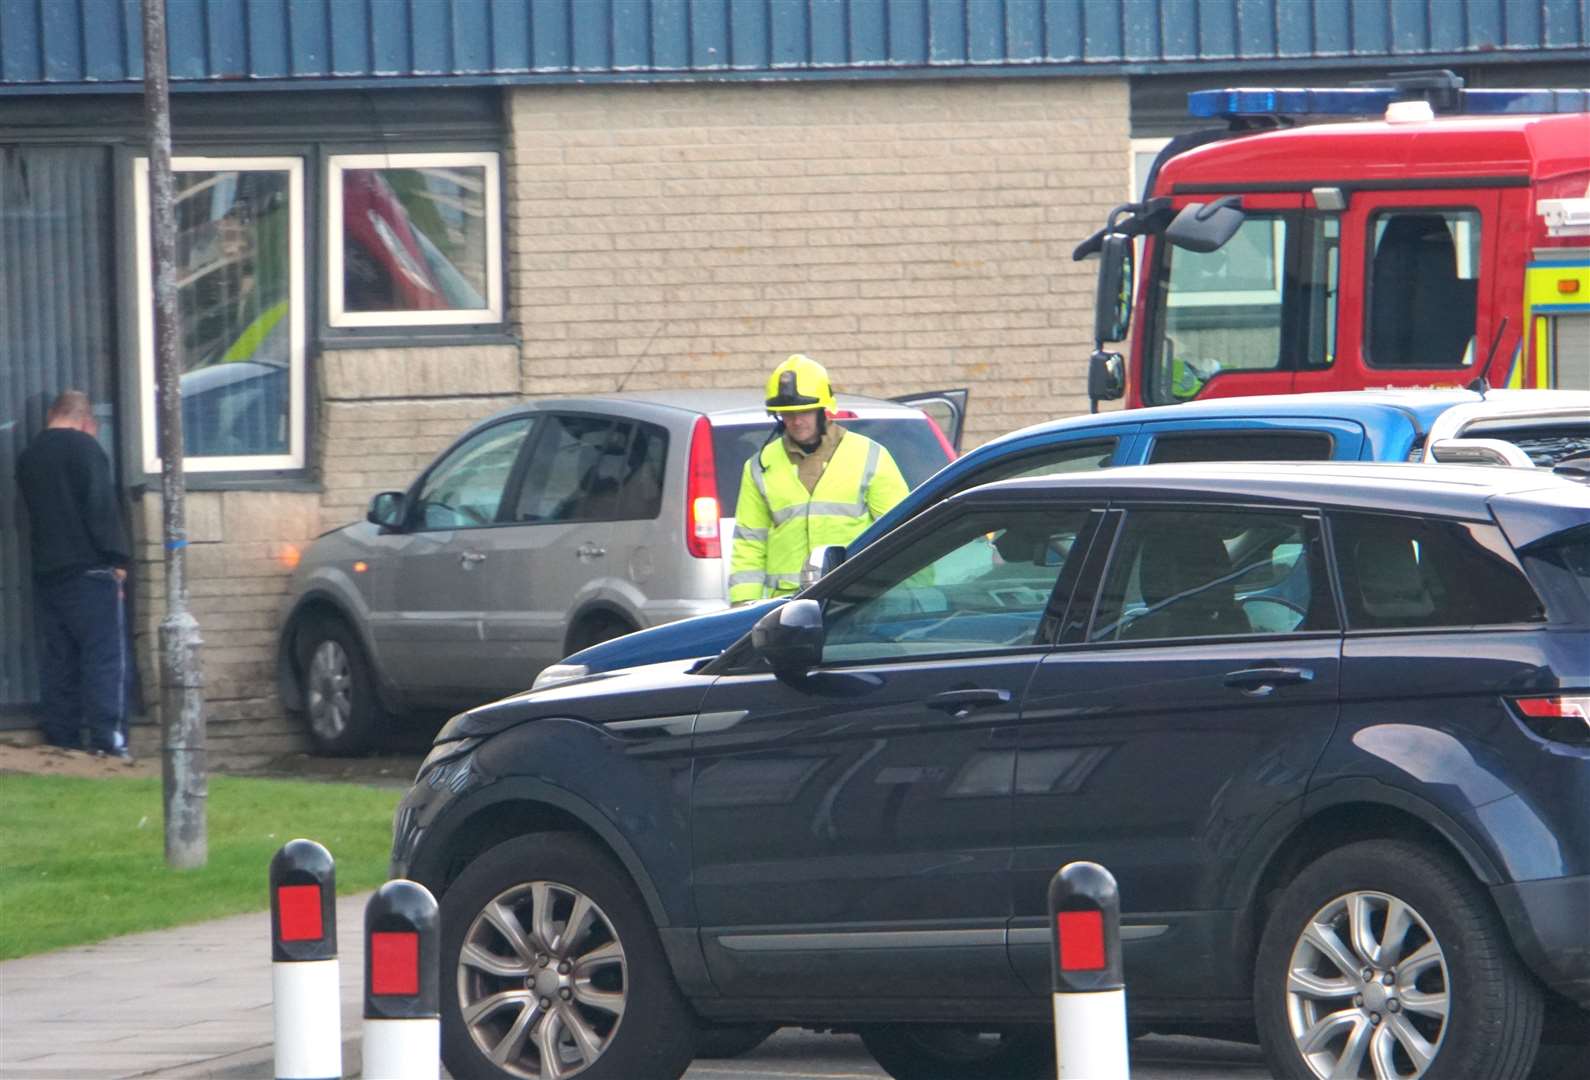 Emergency services at the scene of the incident outside the hospital. Picture: DGS